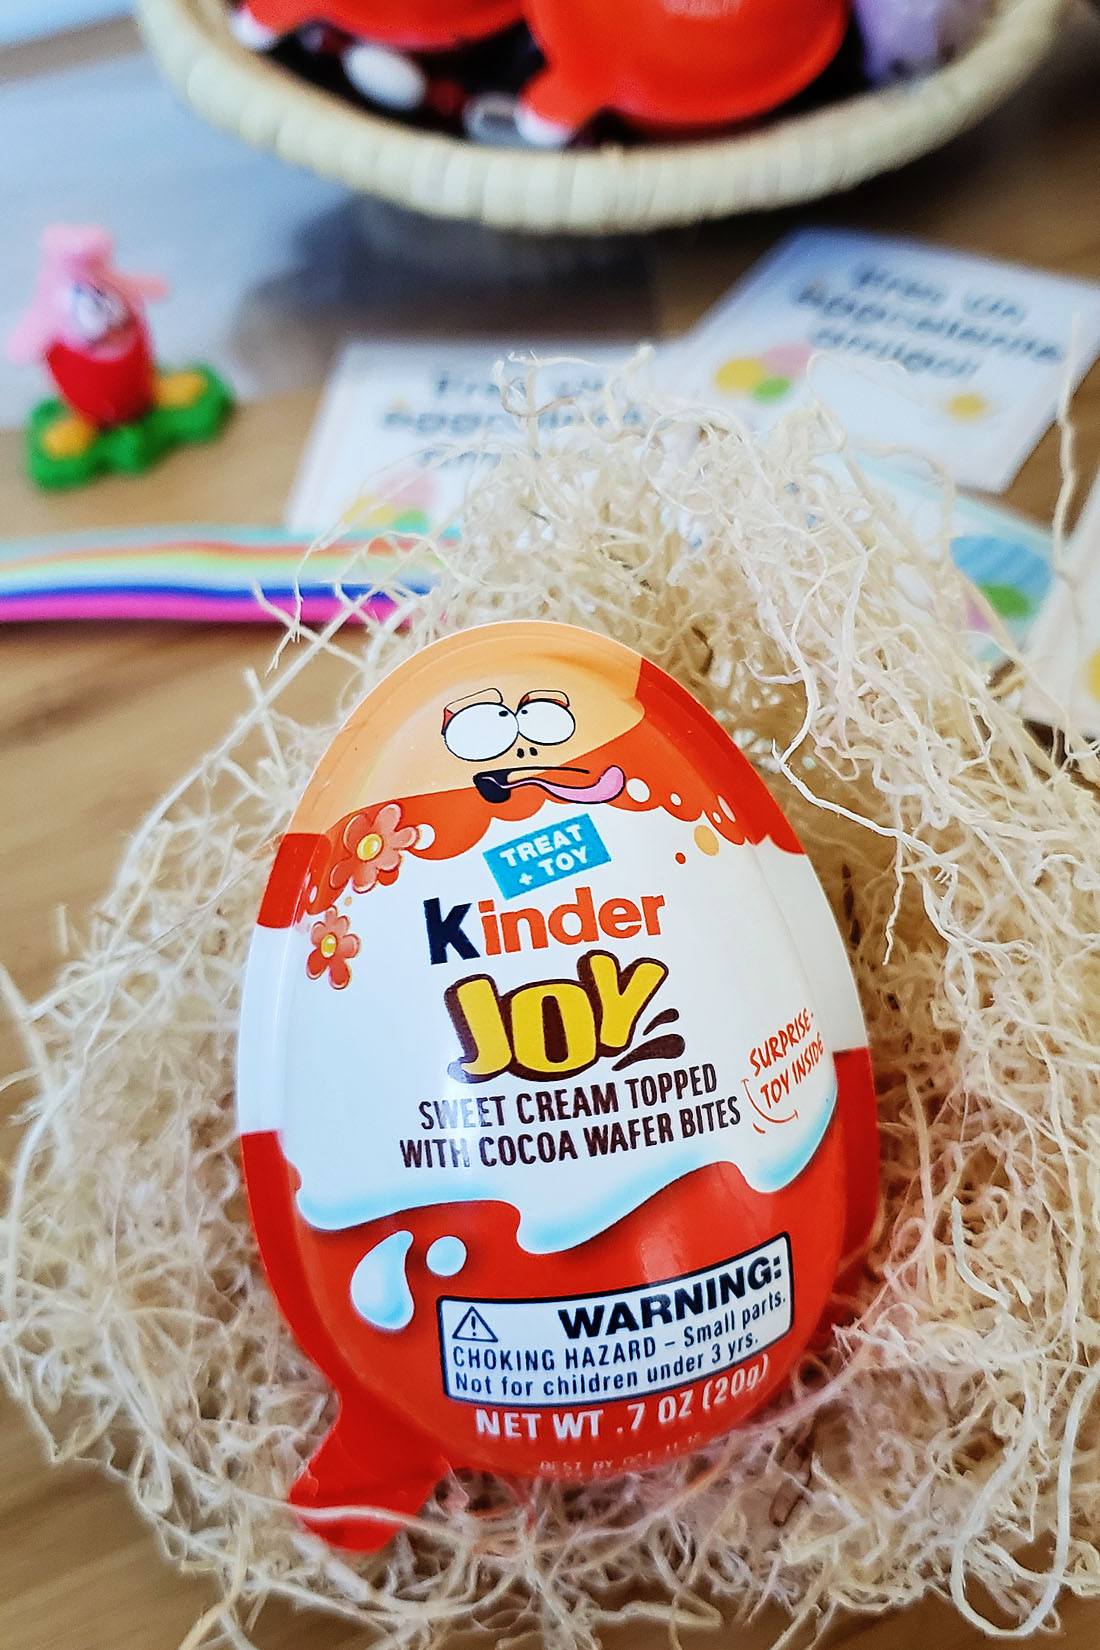 Easter bags with kinder joy treats